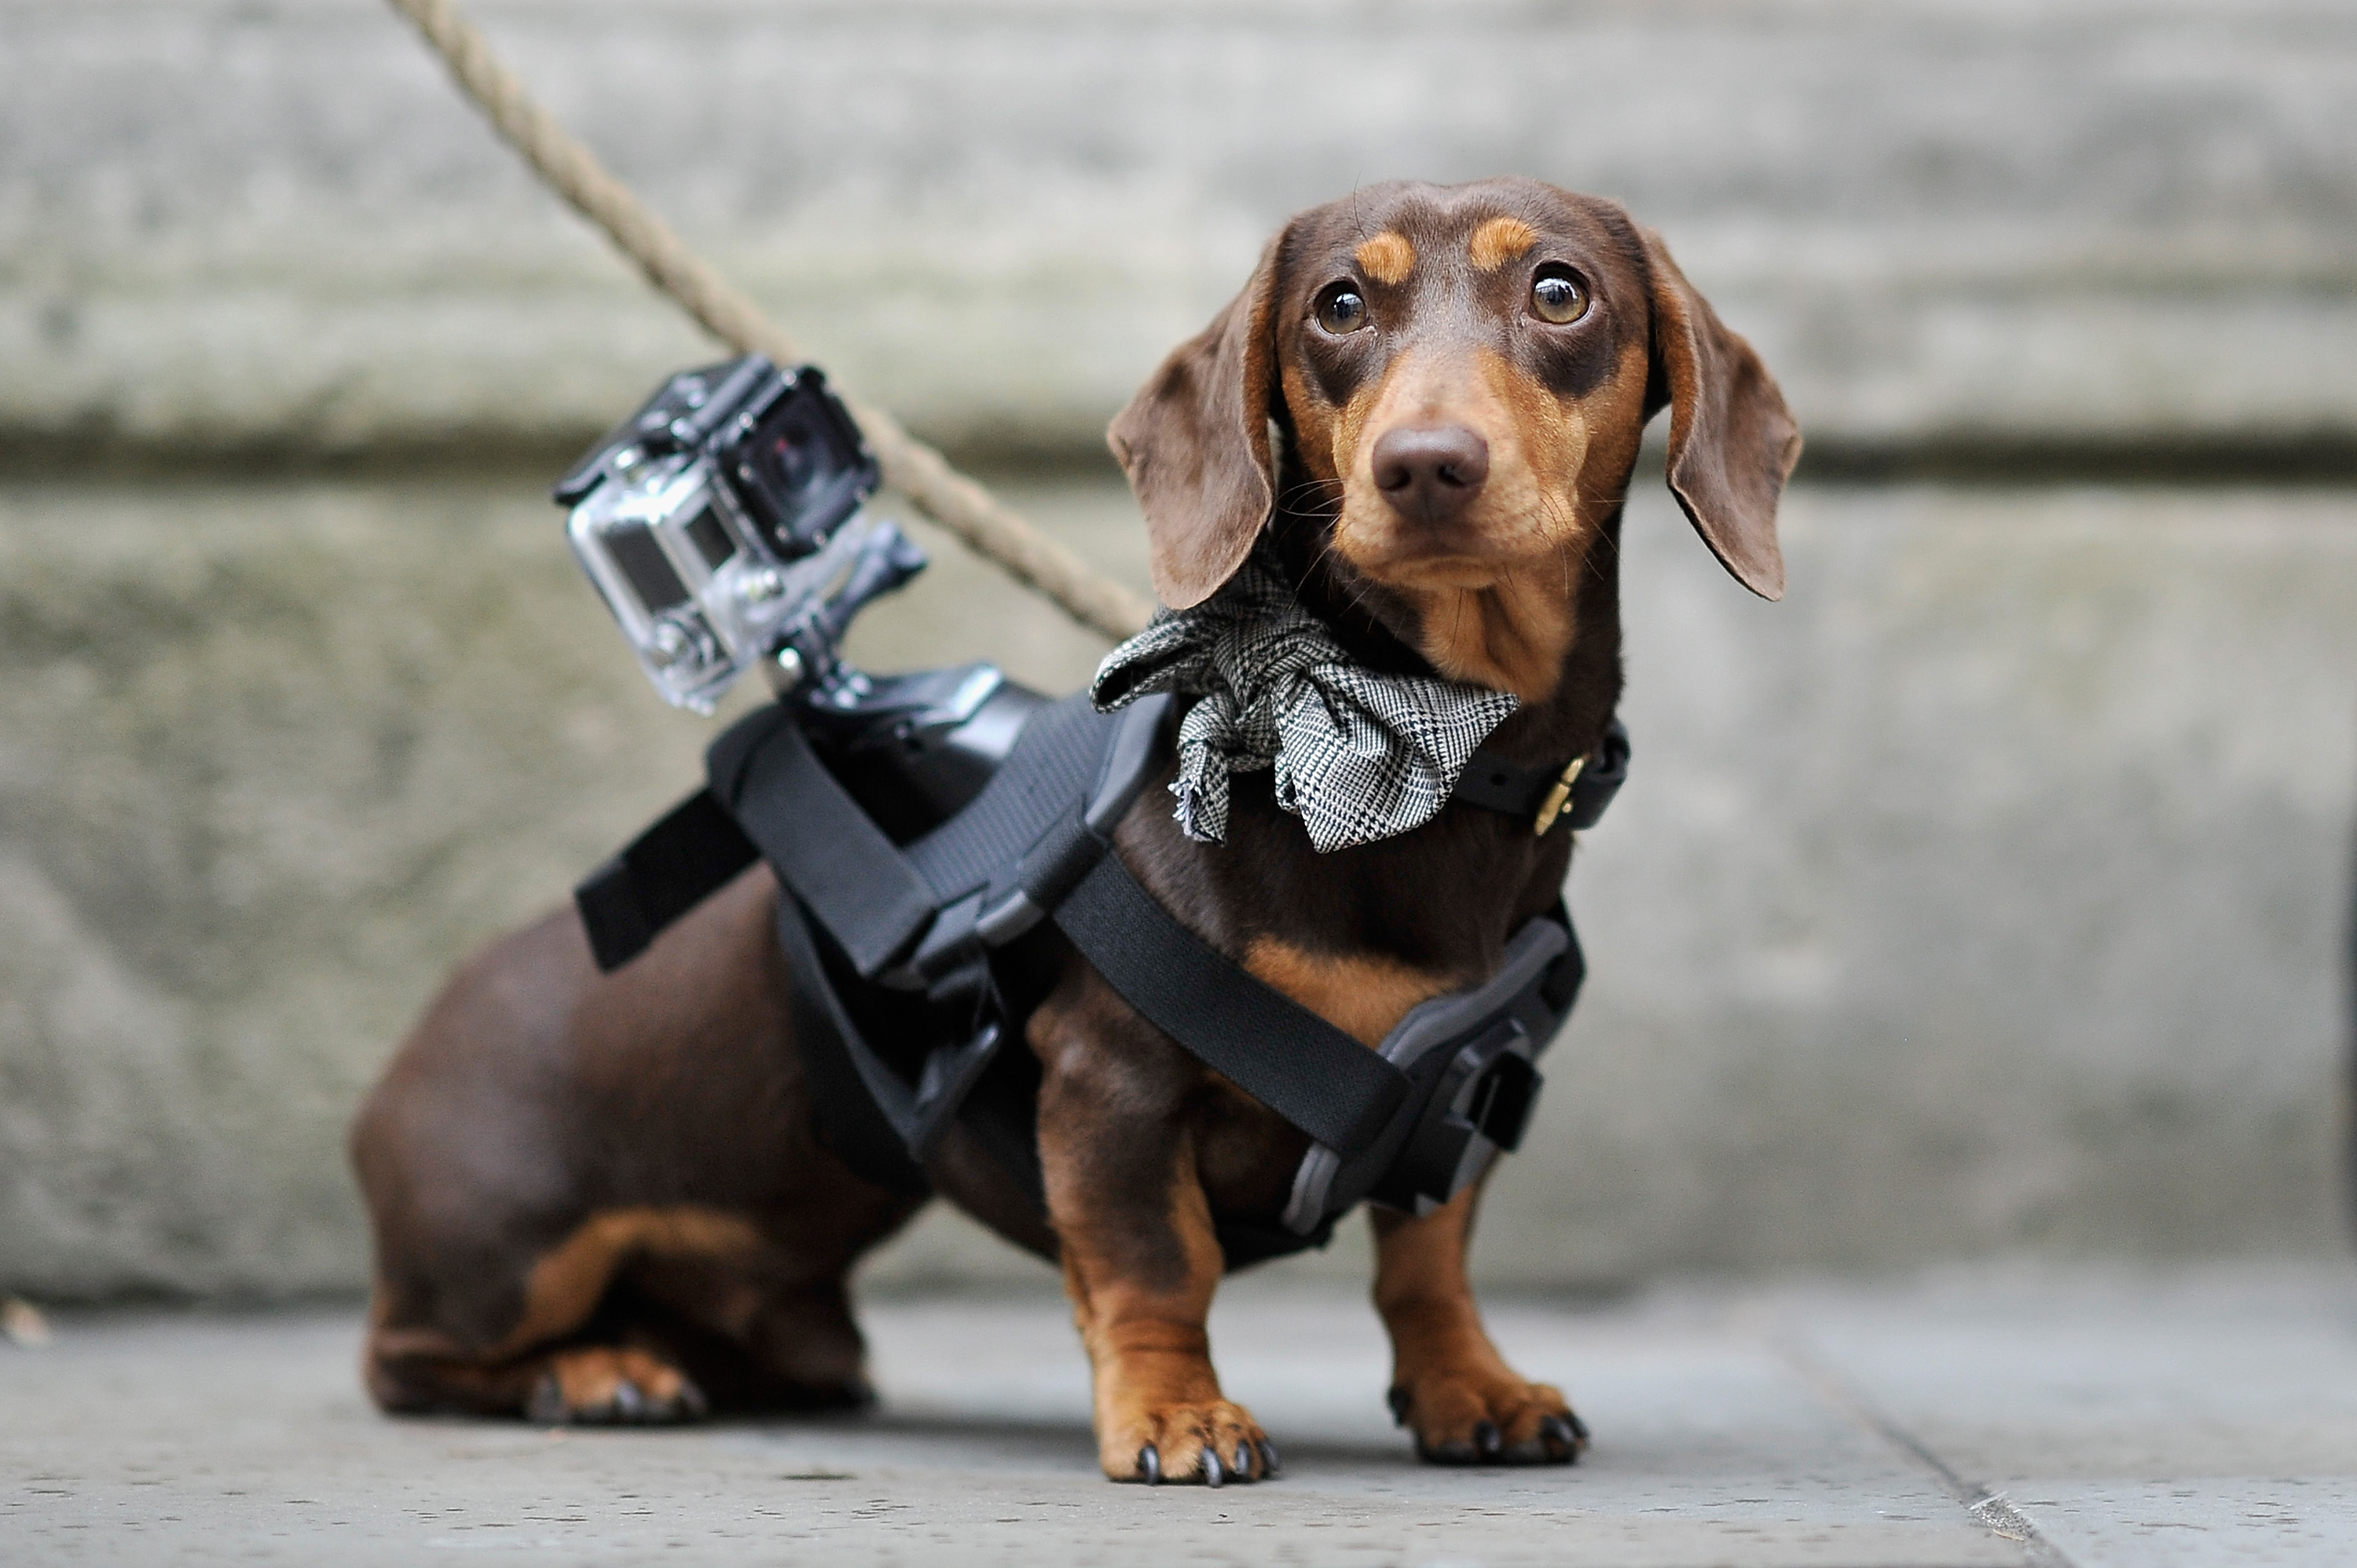 Sergio the Shoe Hunter is seen with his GoPro camera outside the Matthew Williamson show during London Fashion Week Spring Summer 2015 at  on September 14, 2014 in London, England. (Gareth Cattermole&mdash;Getty Images)